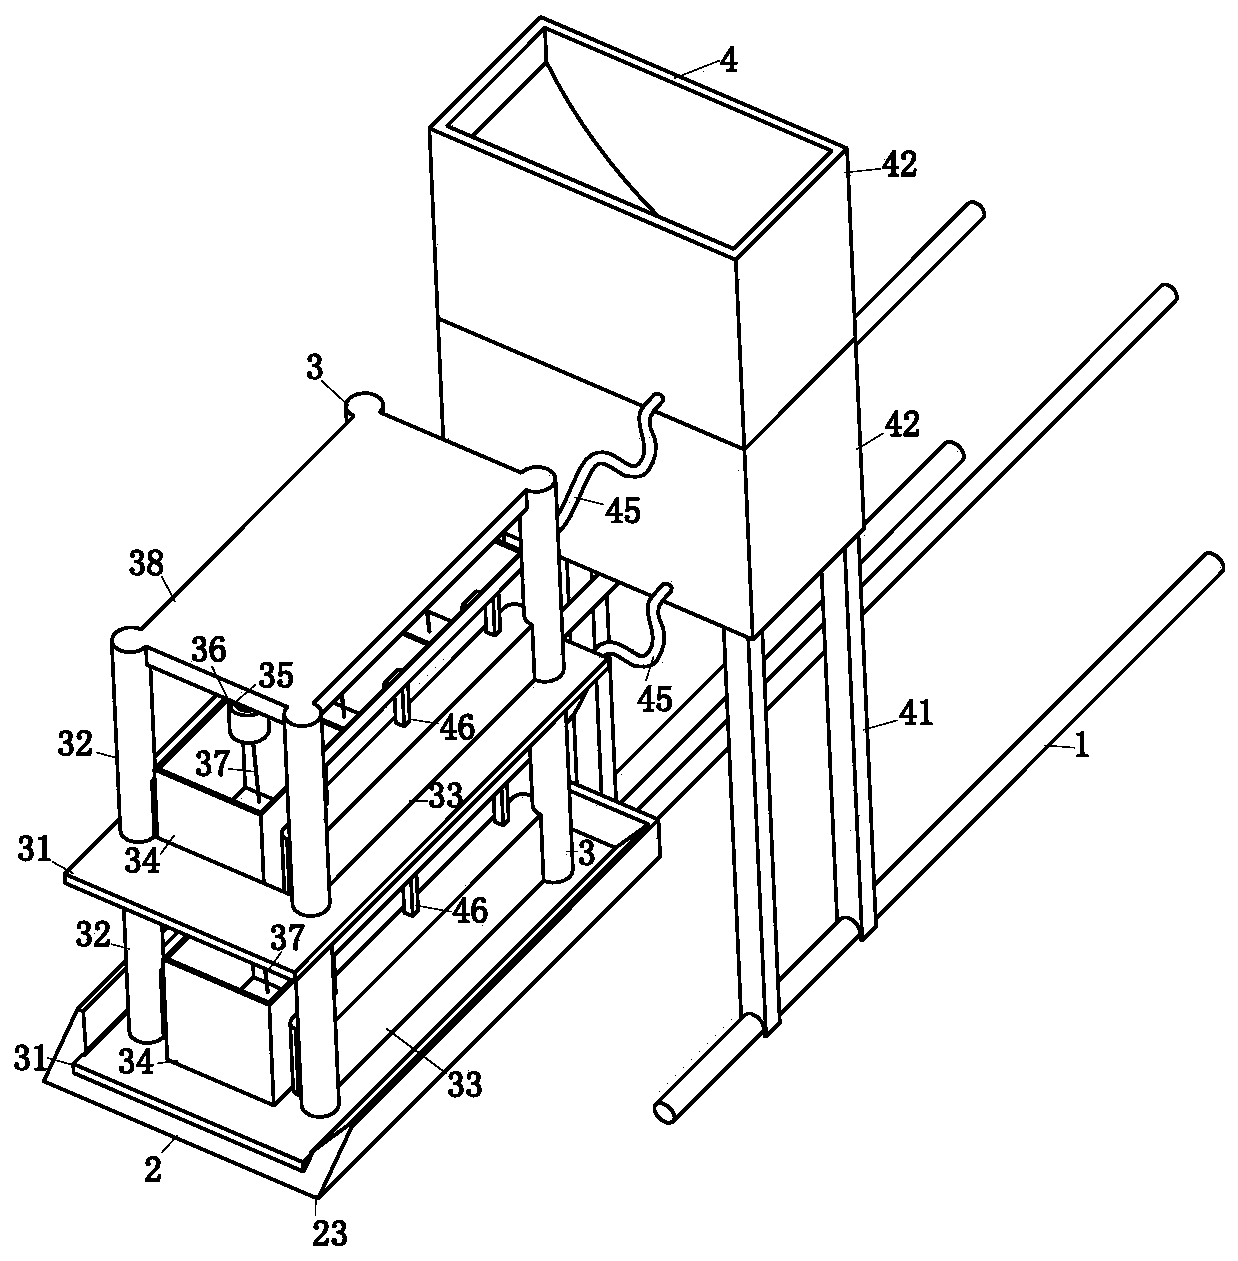 A cement mortar vibrating system